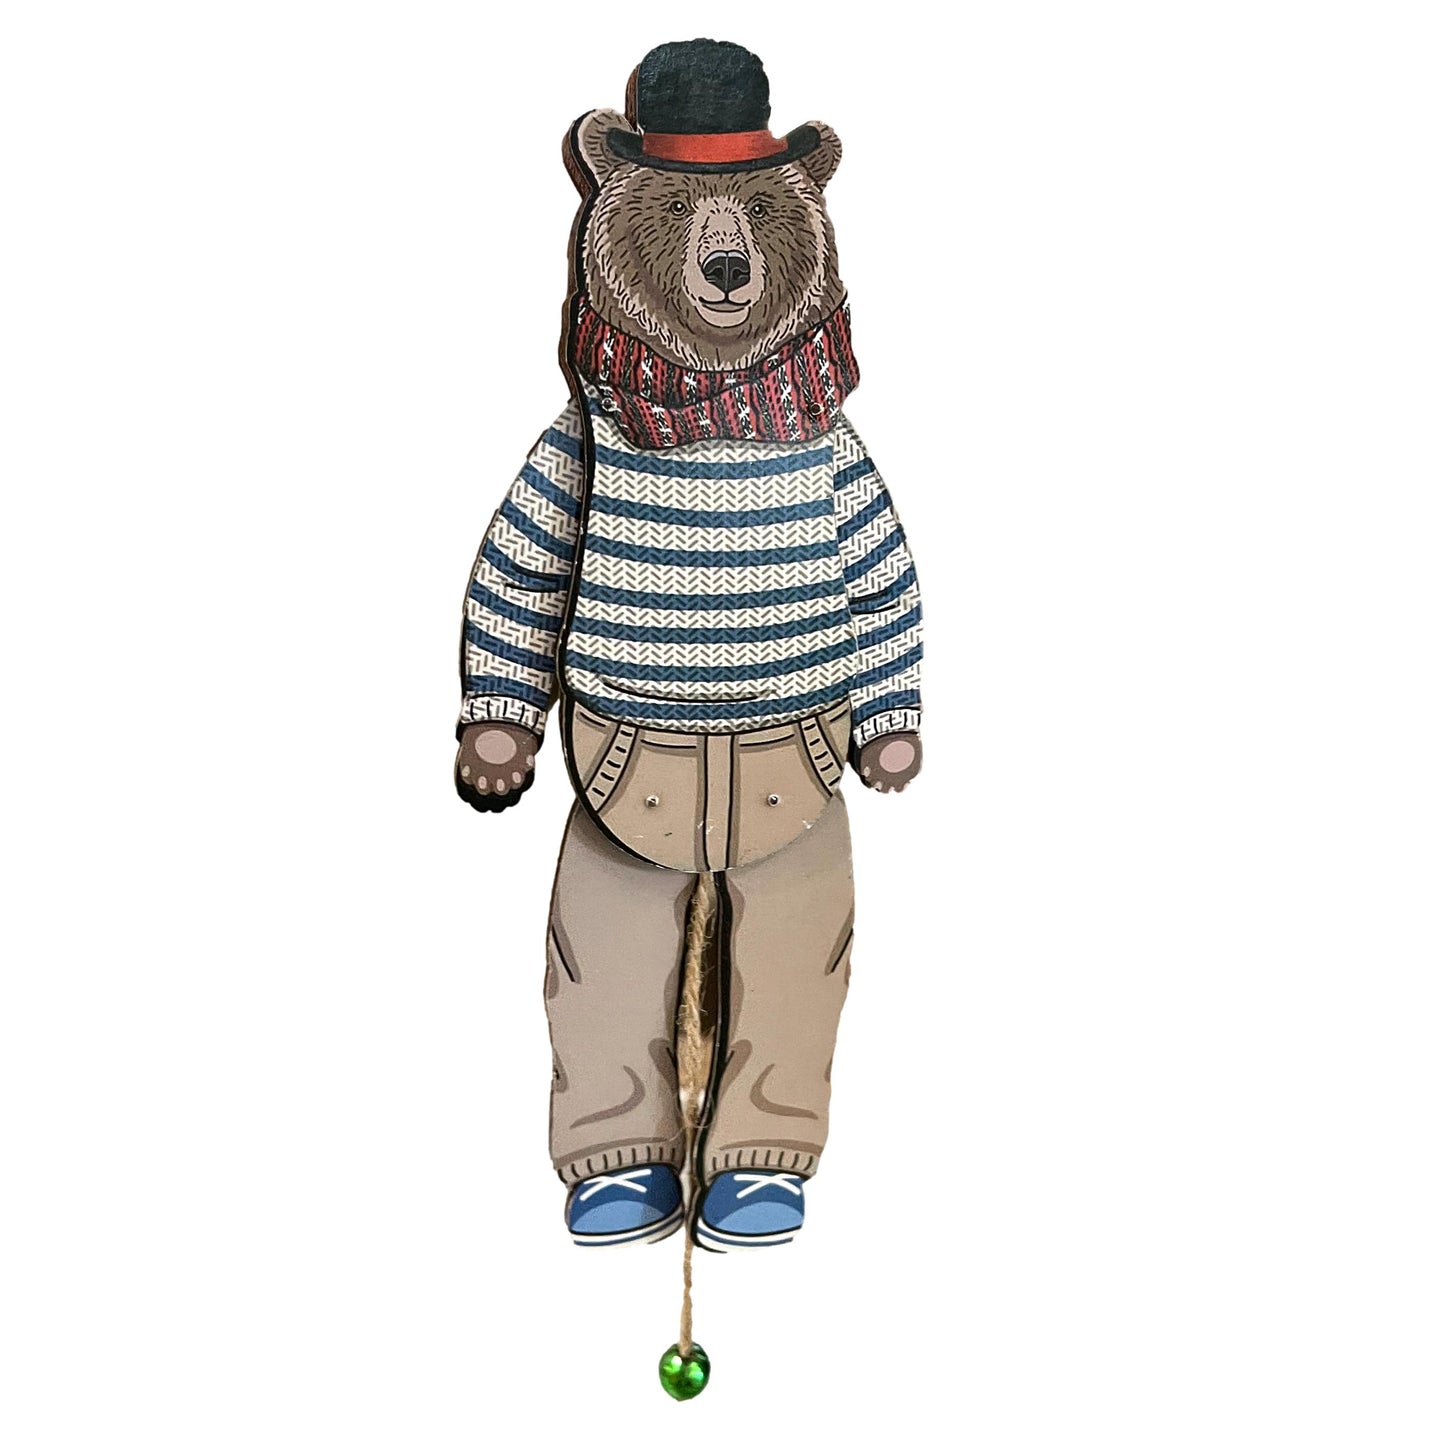 Pull Toy Bear Ornament